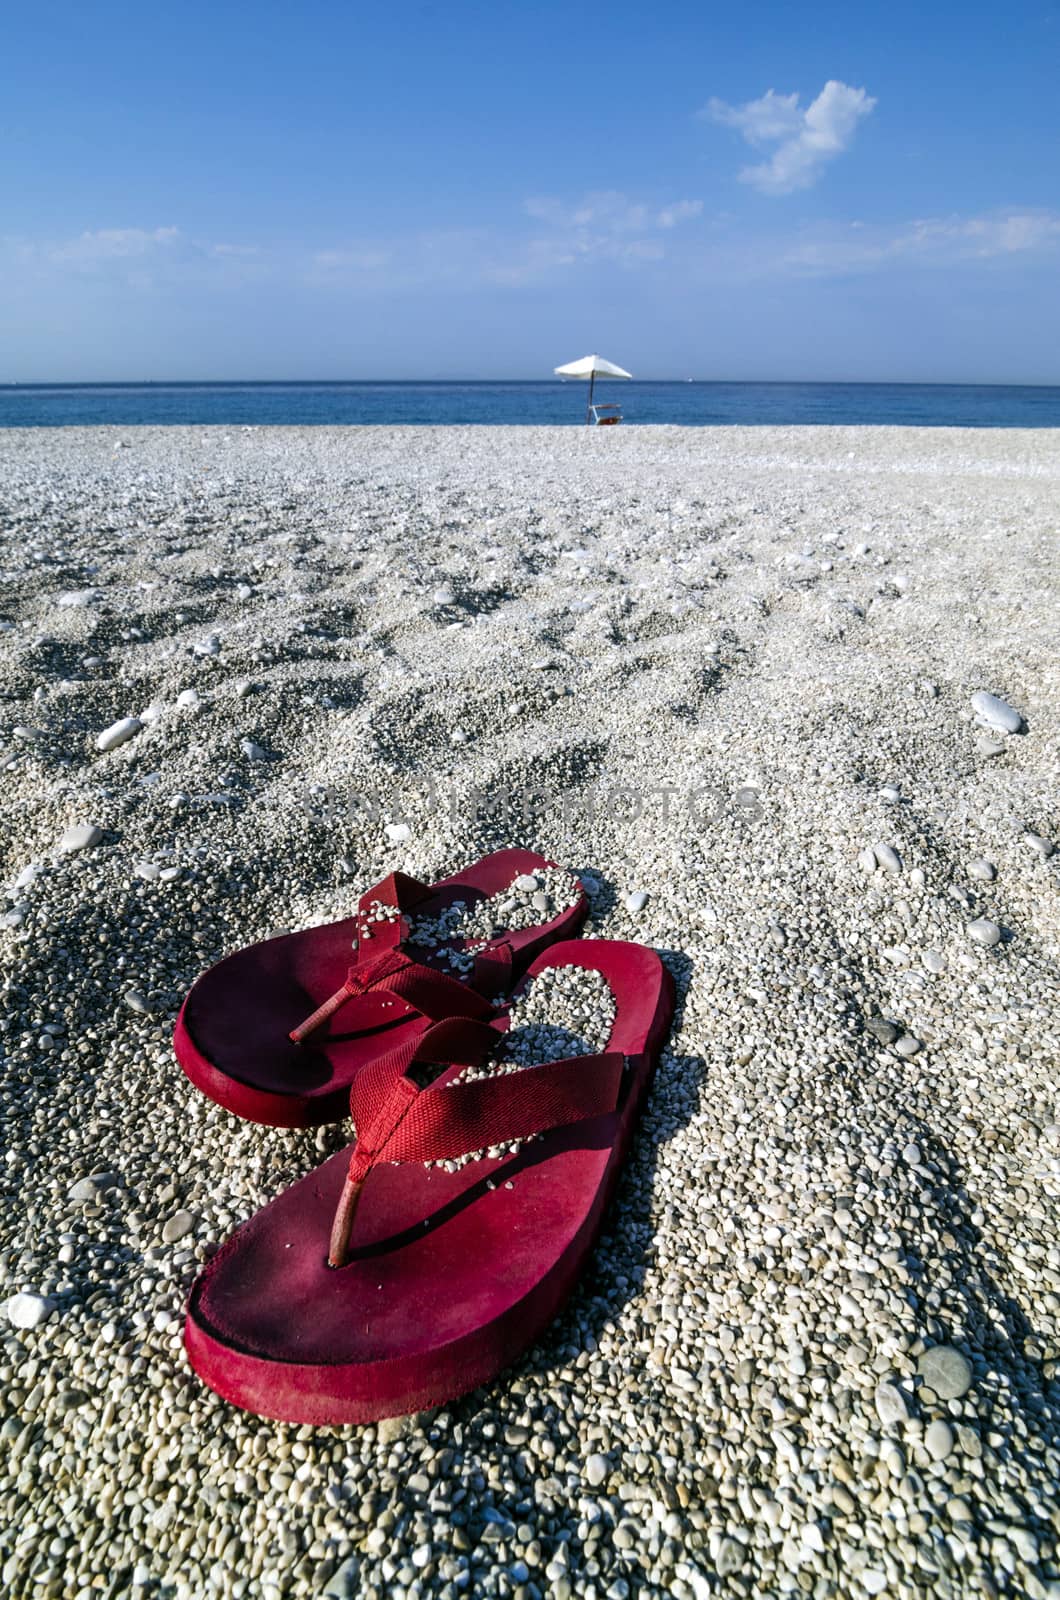 Pair of flip-flops on a beach by Anzemulec